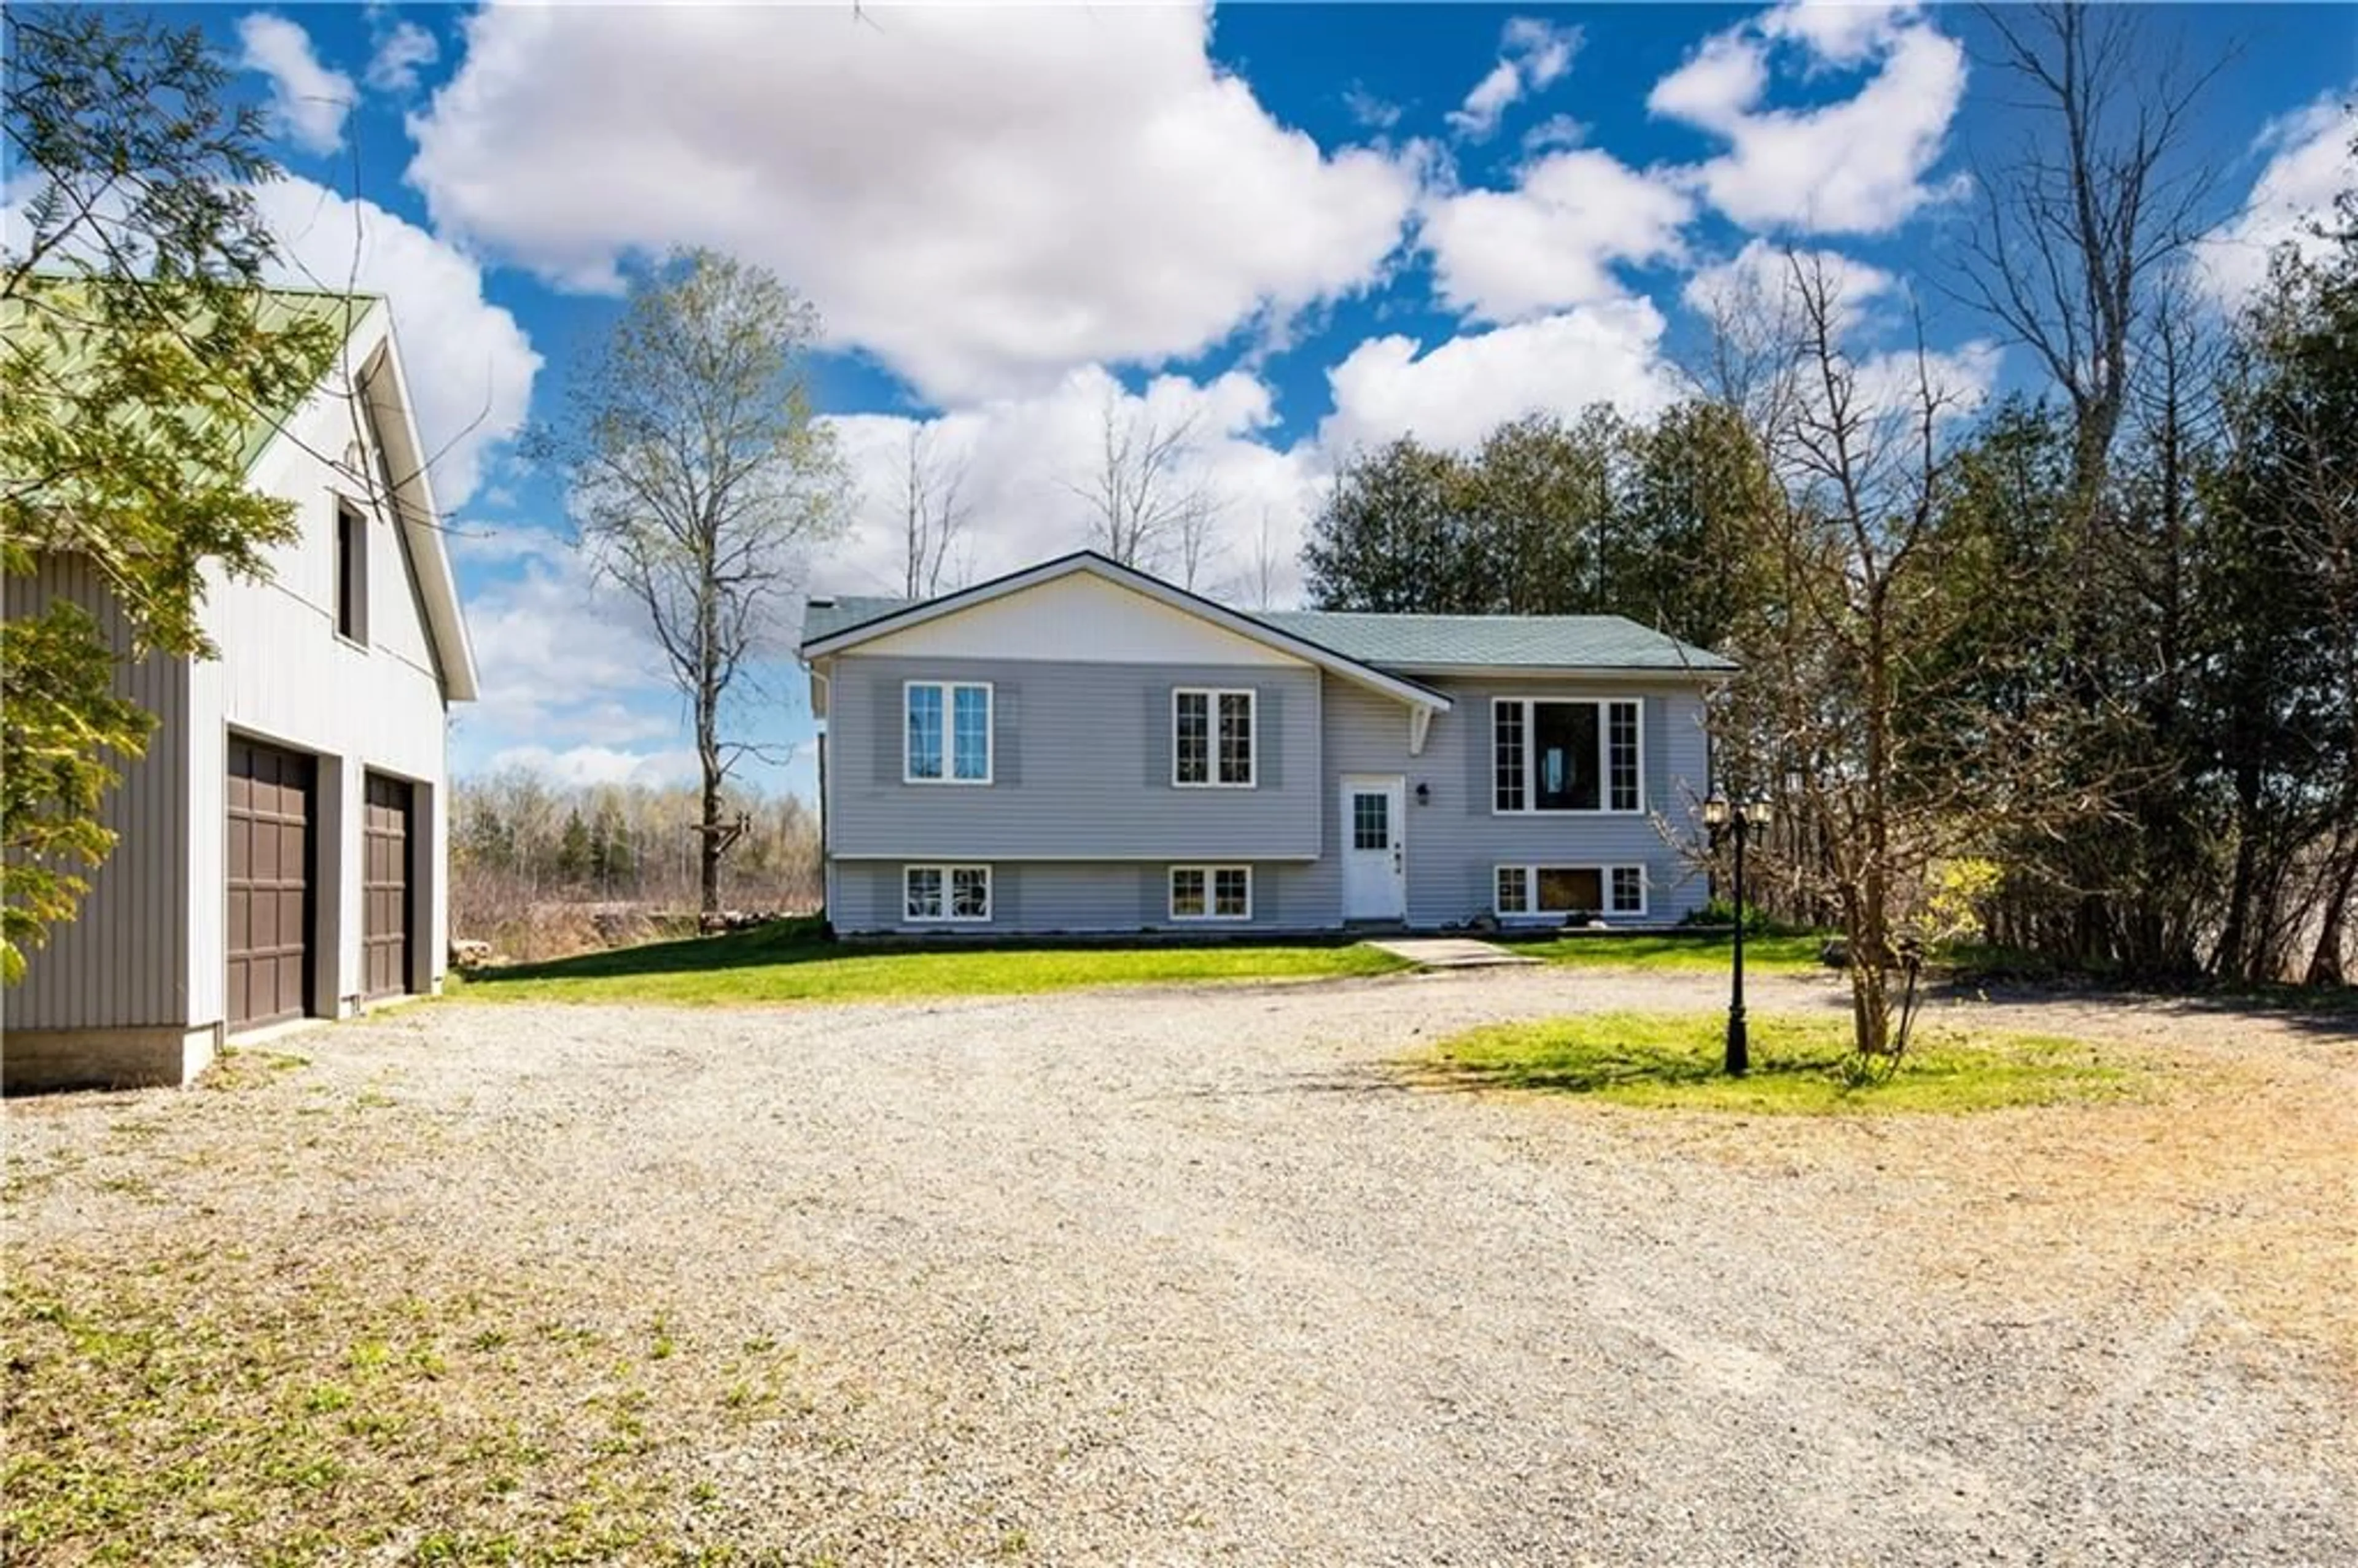 Cottage for 653 CROZIER Rd, Oxford Mills Ontario K0G 1S0